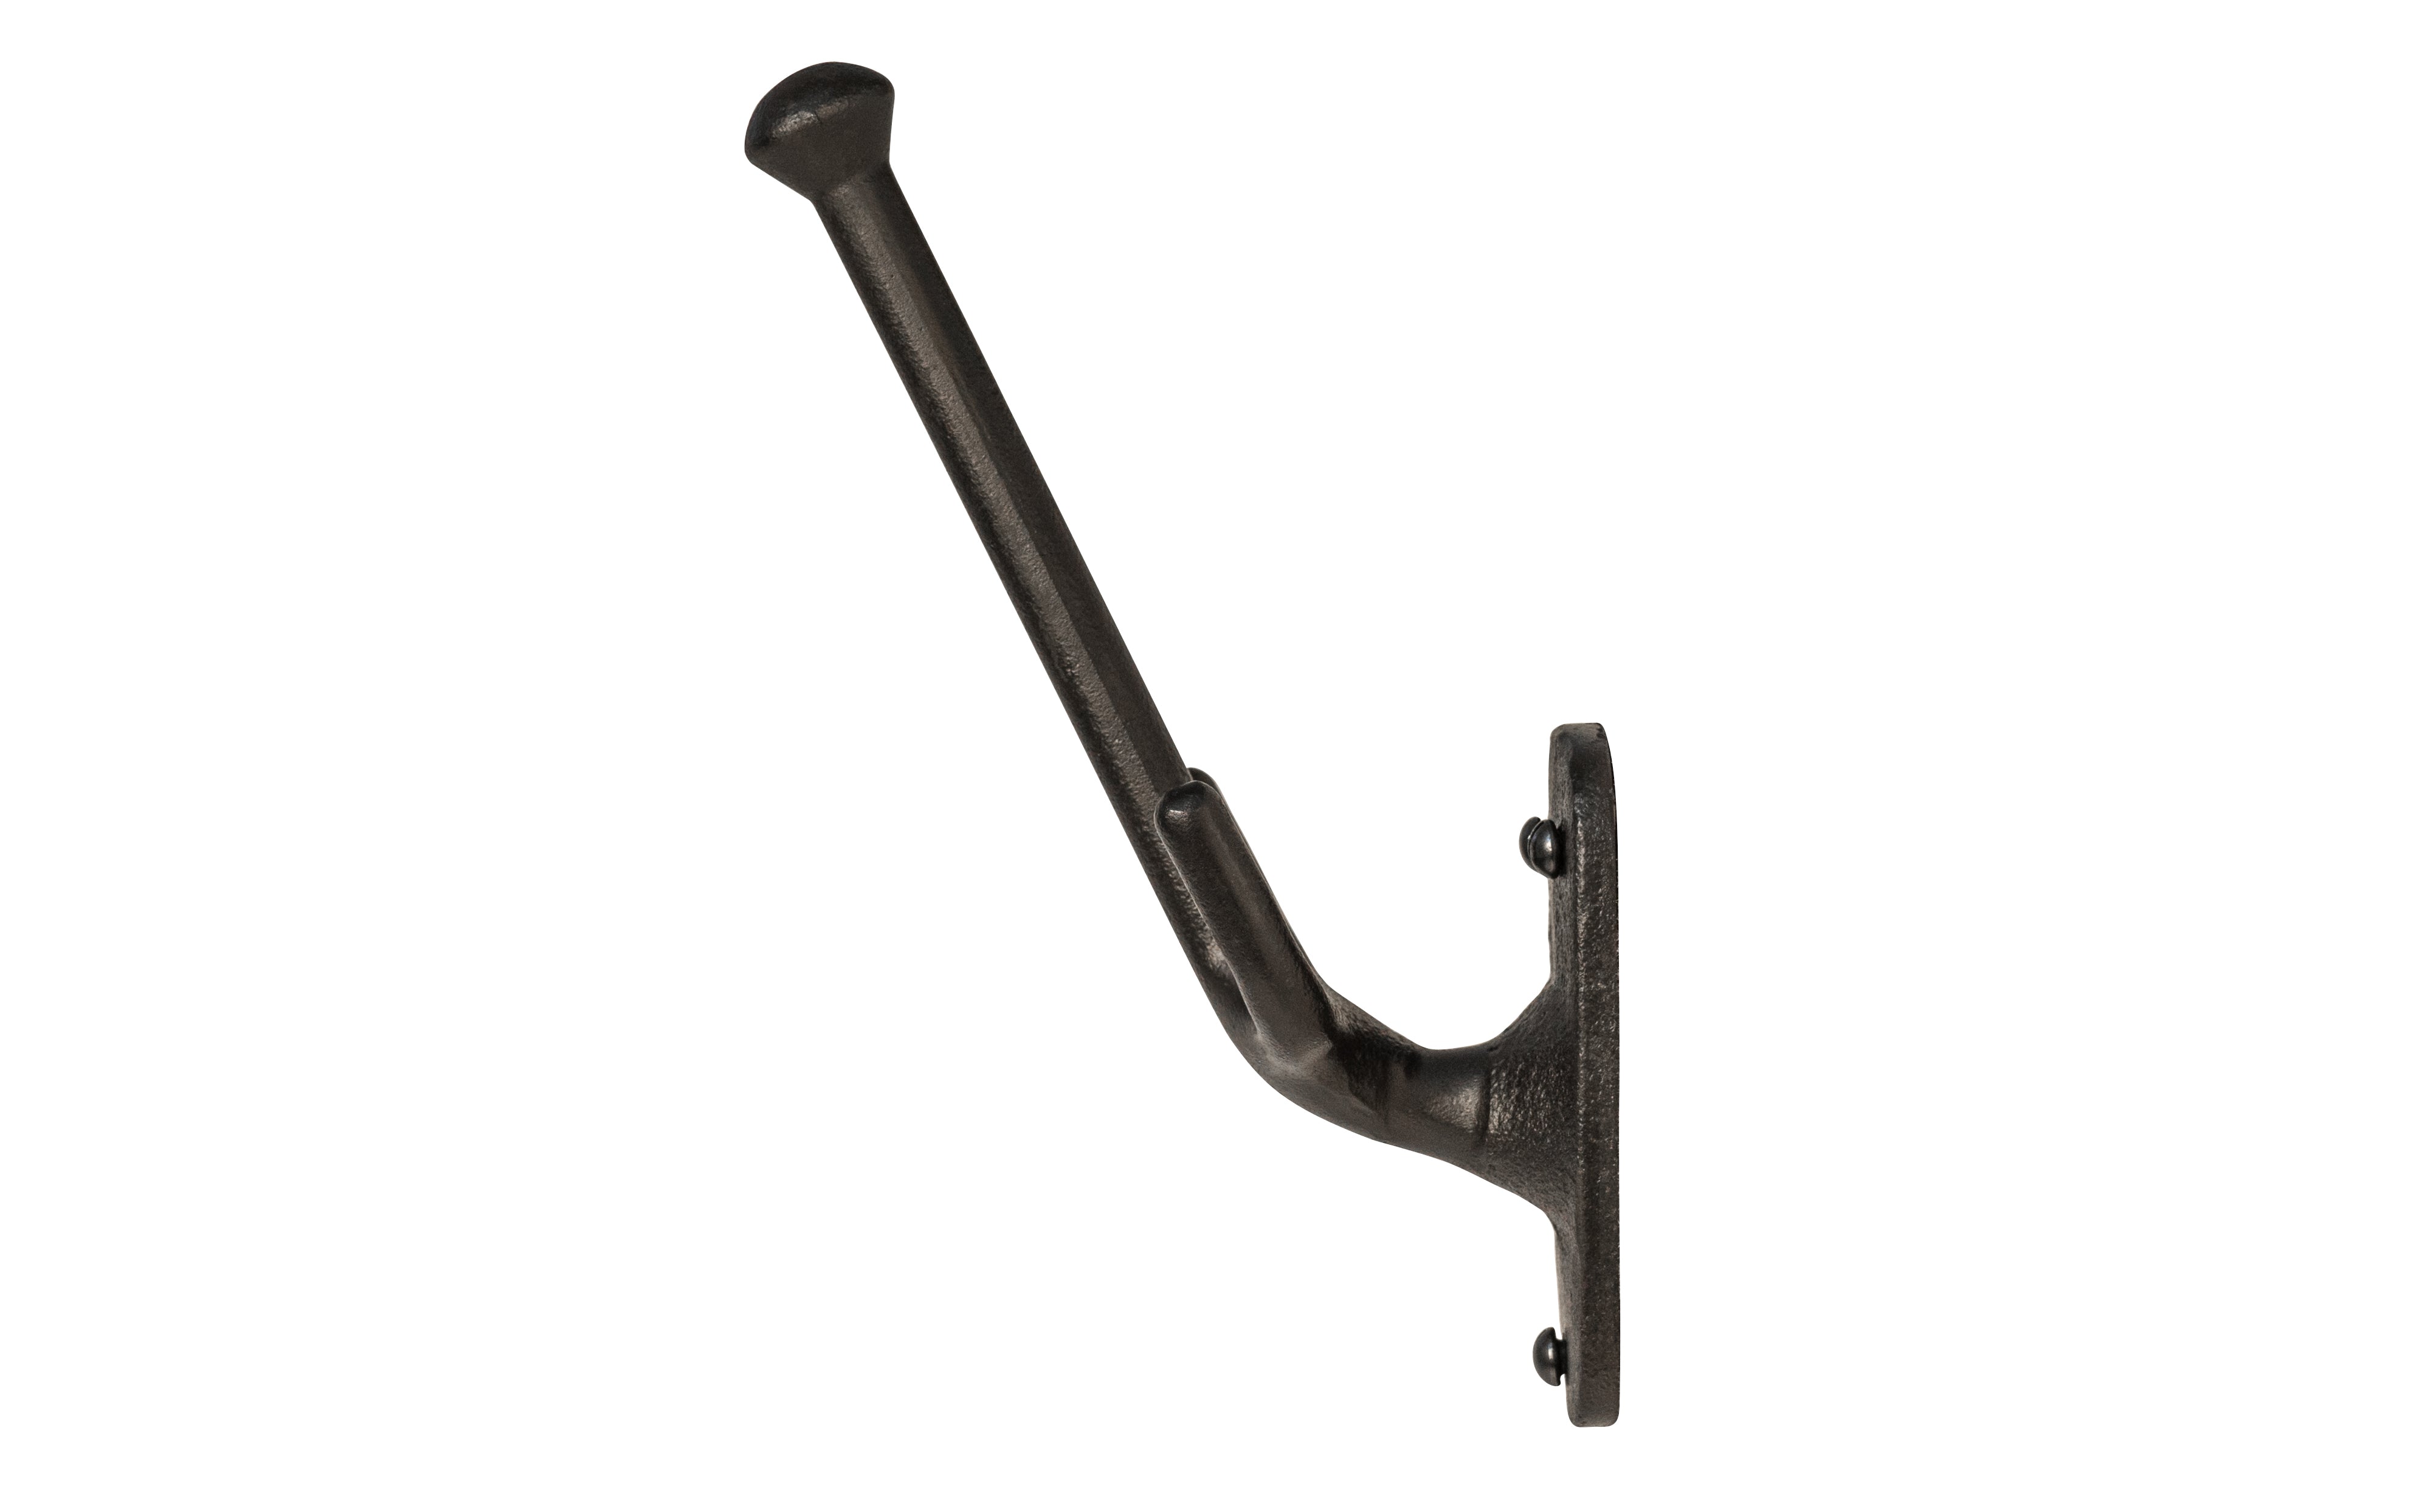 Vintage-style black cast iron hall hook designed in the Gustav Stickley style. Excellent for use in hallways, hall trees, kitchens, & many other places. The three-prong hook is made of strong cast iron material, making it great for coats & clothing.  6-1/2